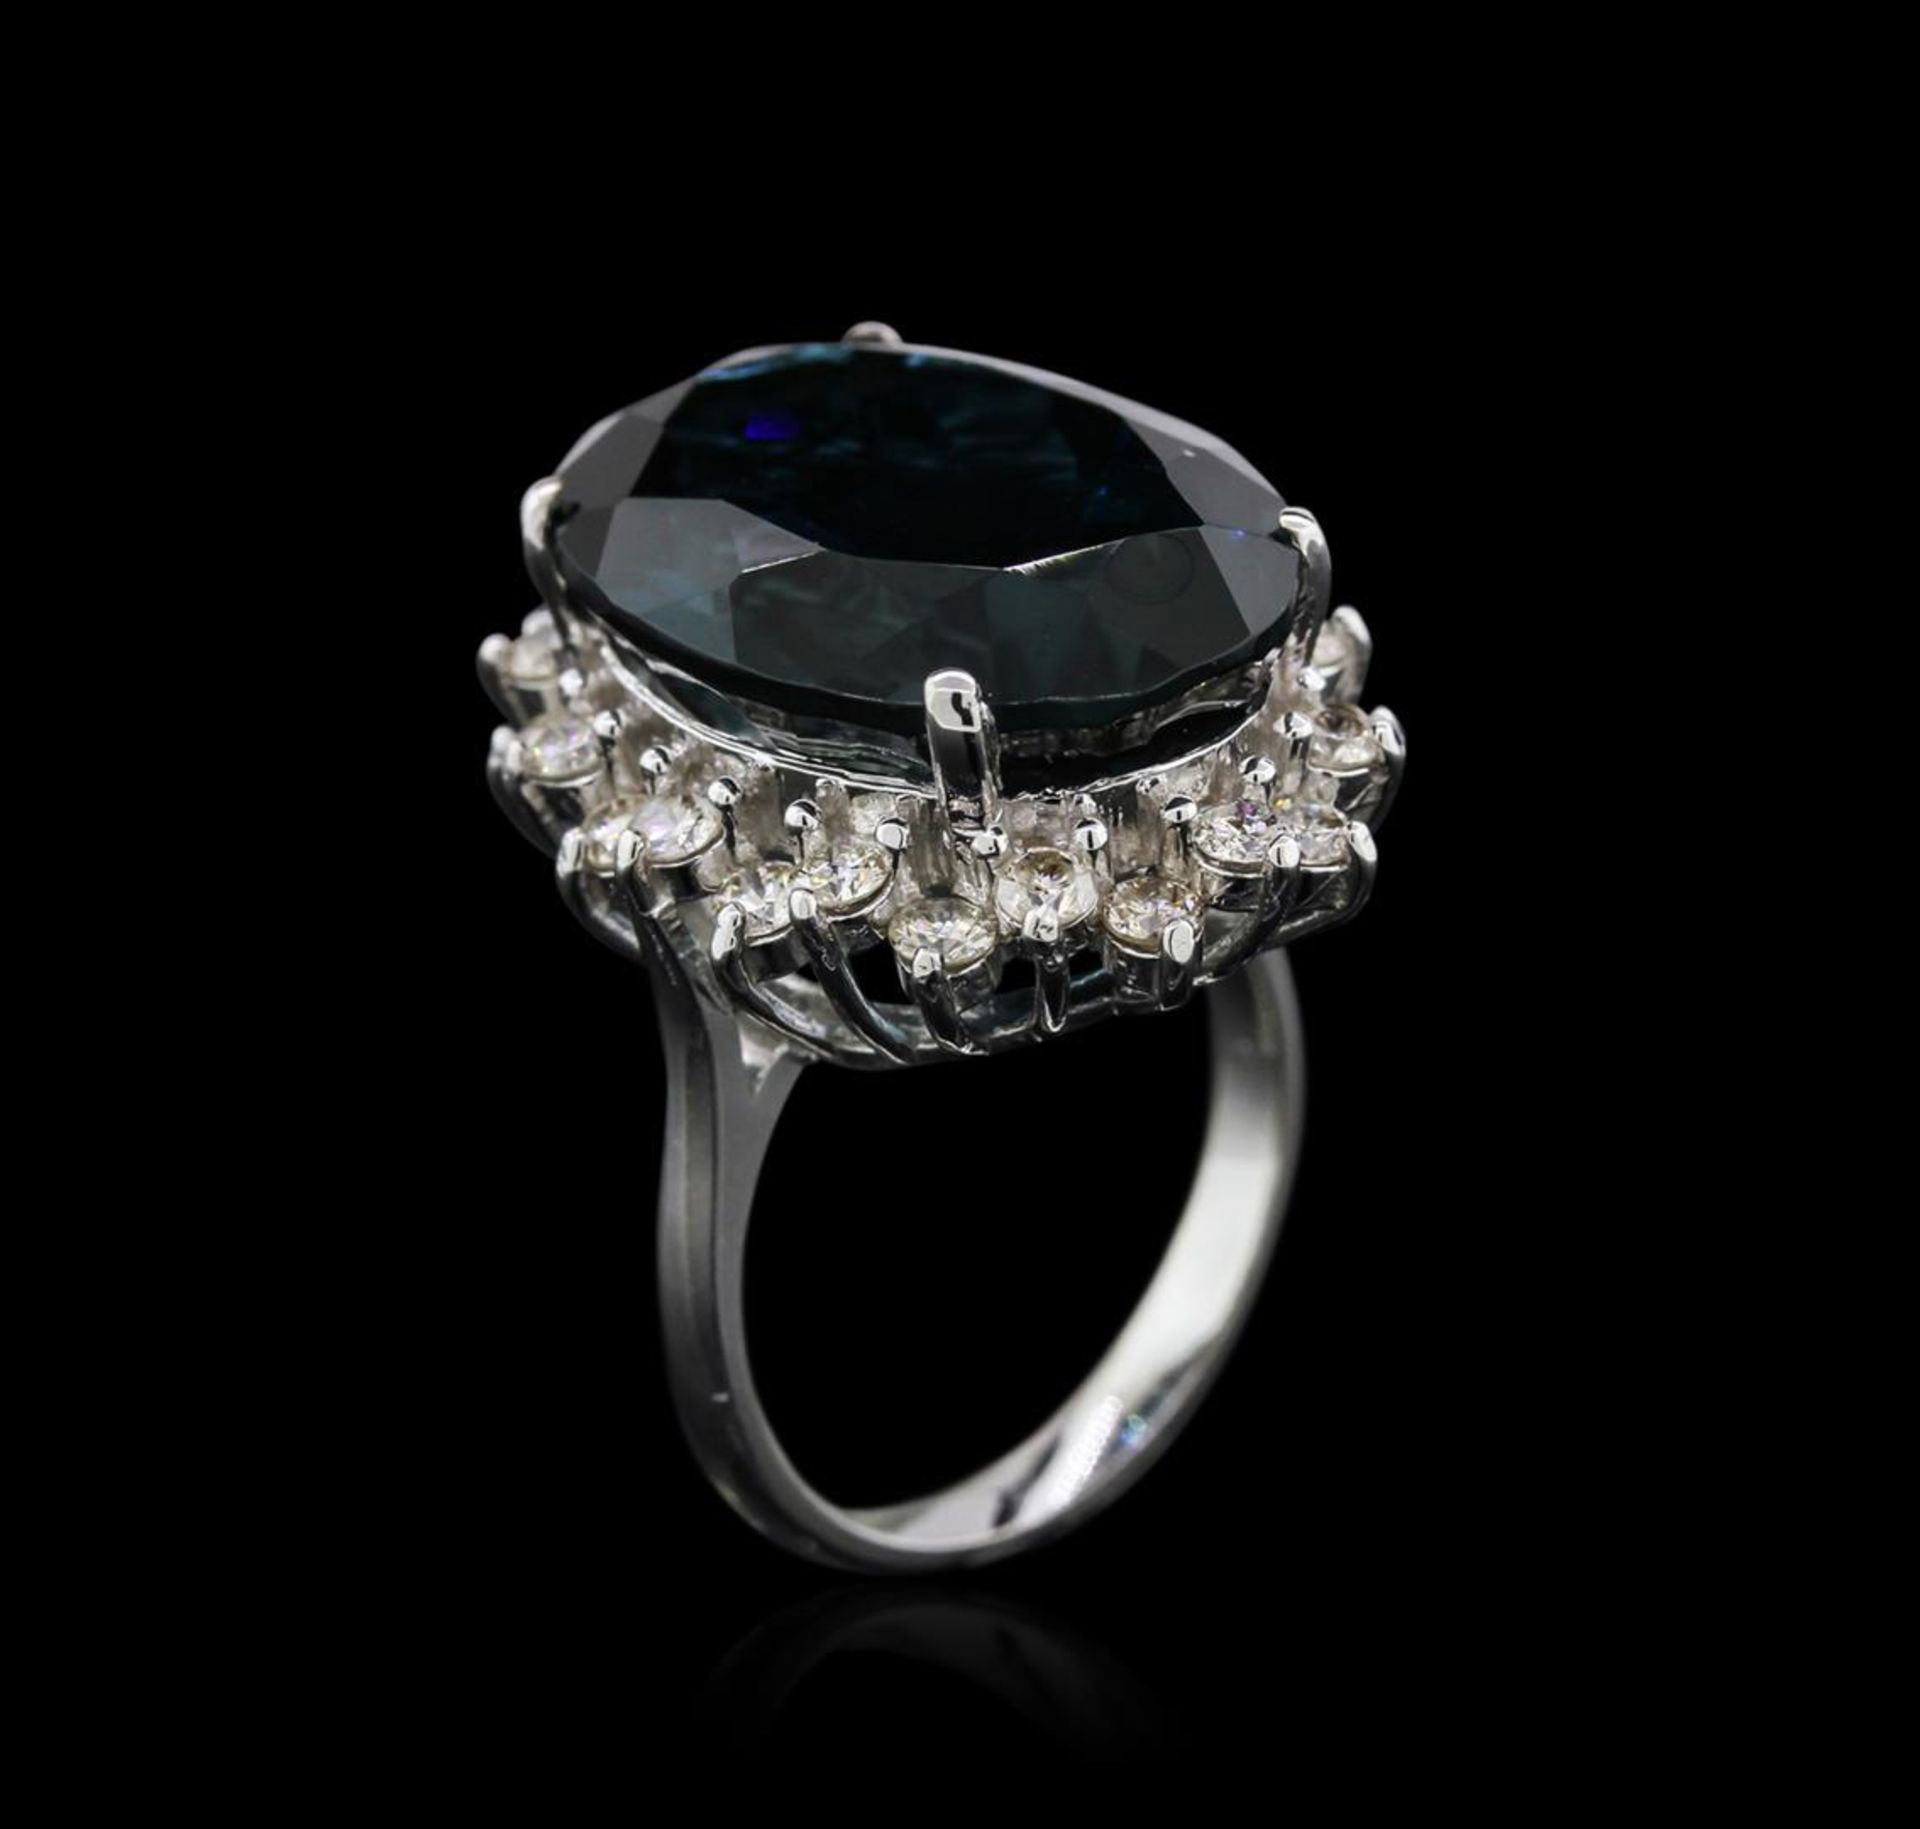 14KT White Gold 22.43 ctw Topaz and Diamond Ring - Image 3 of 4